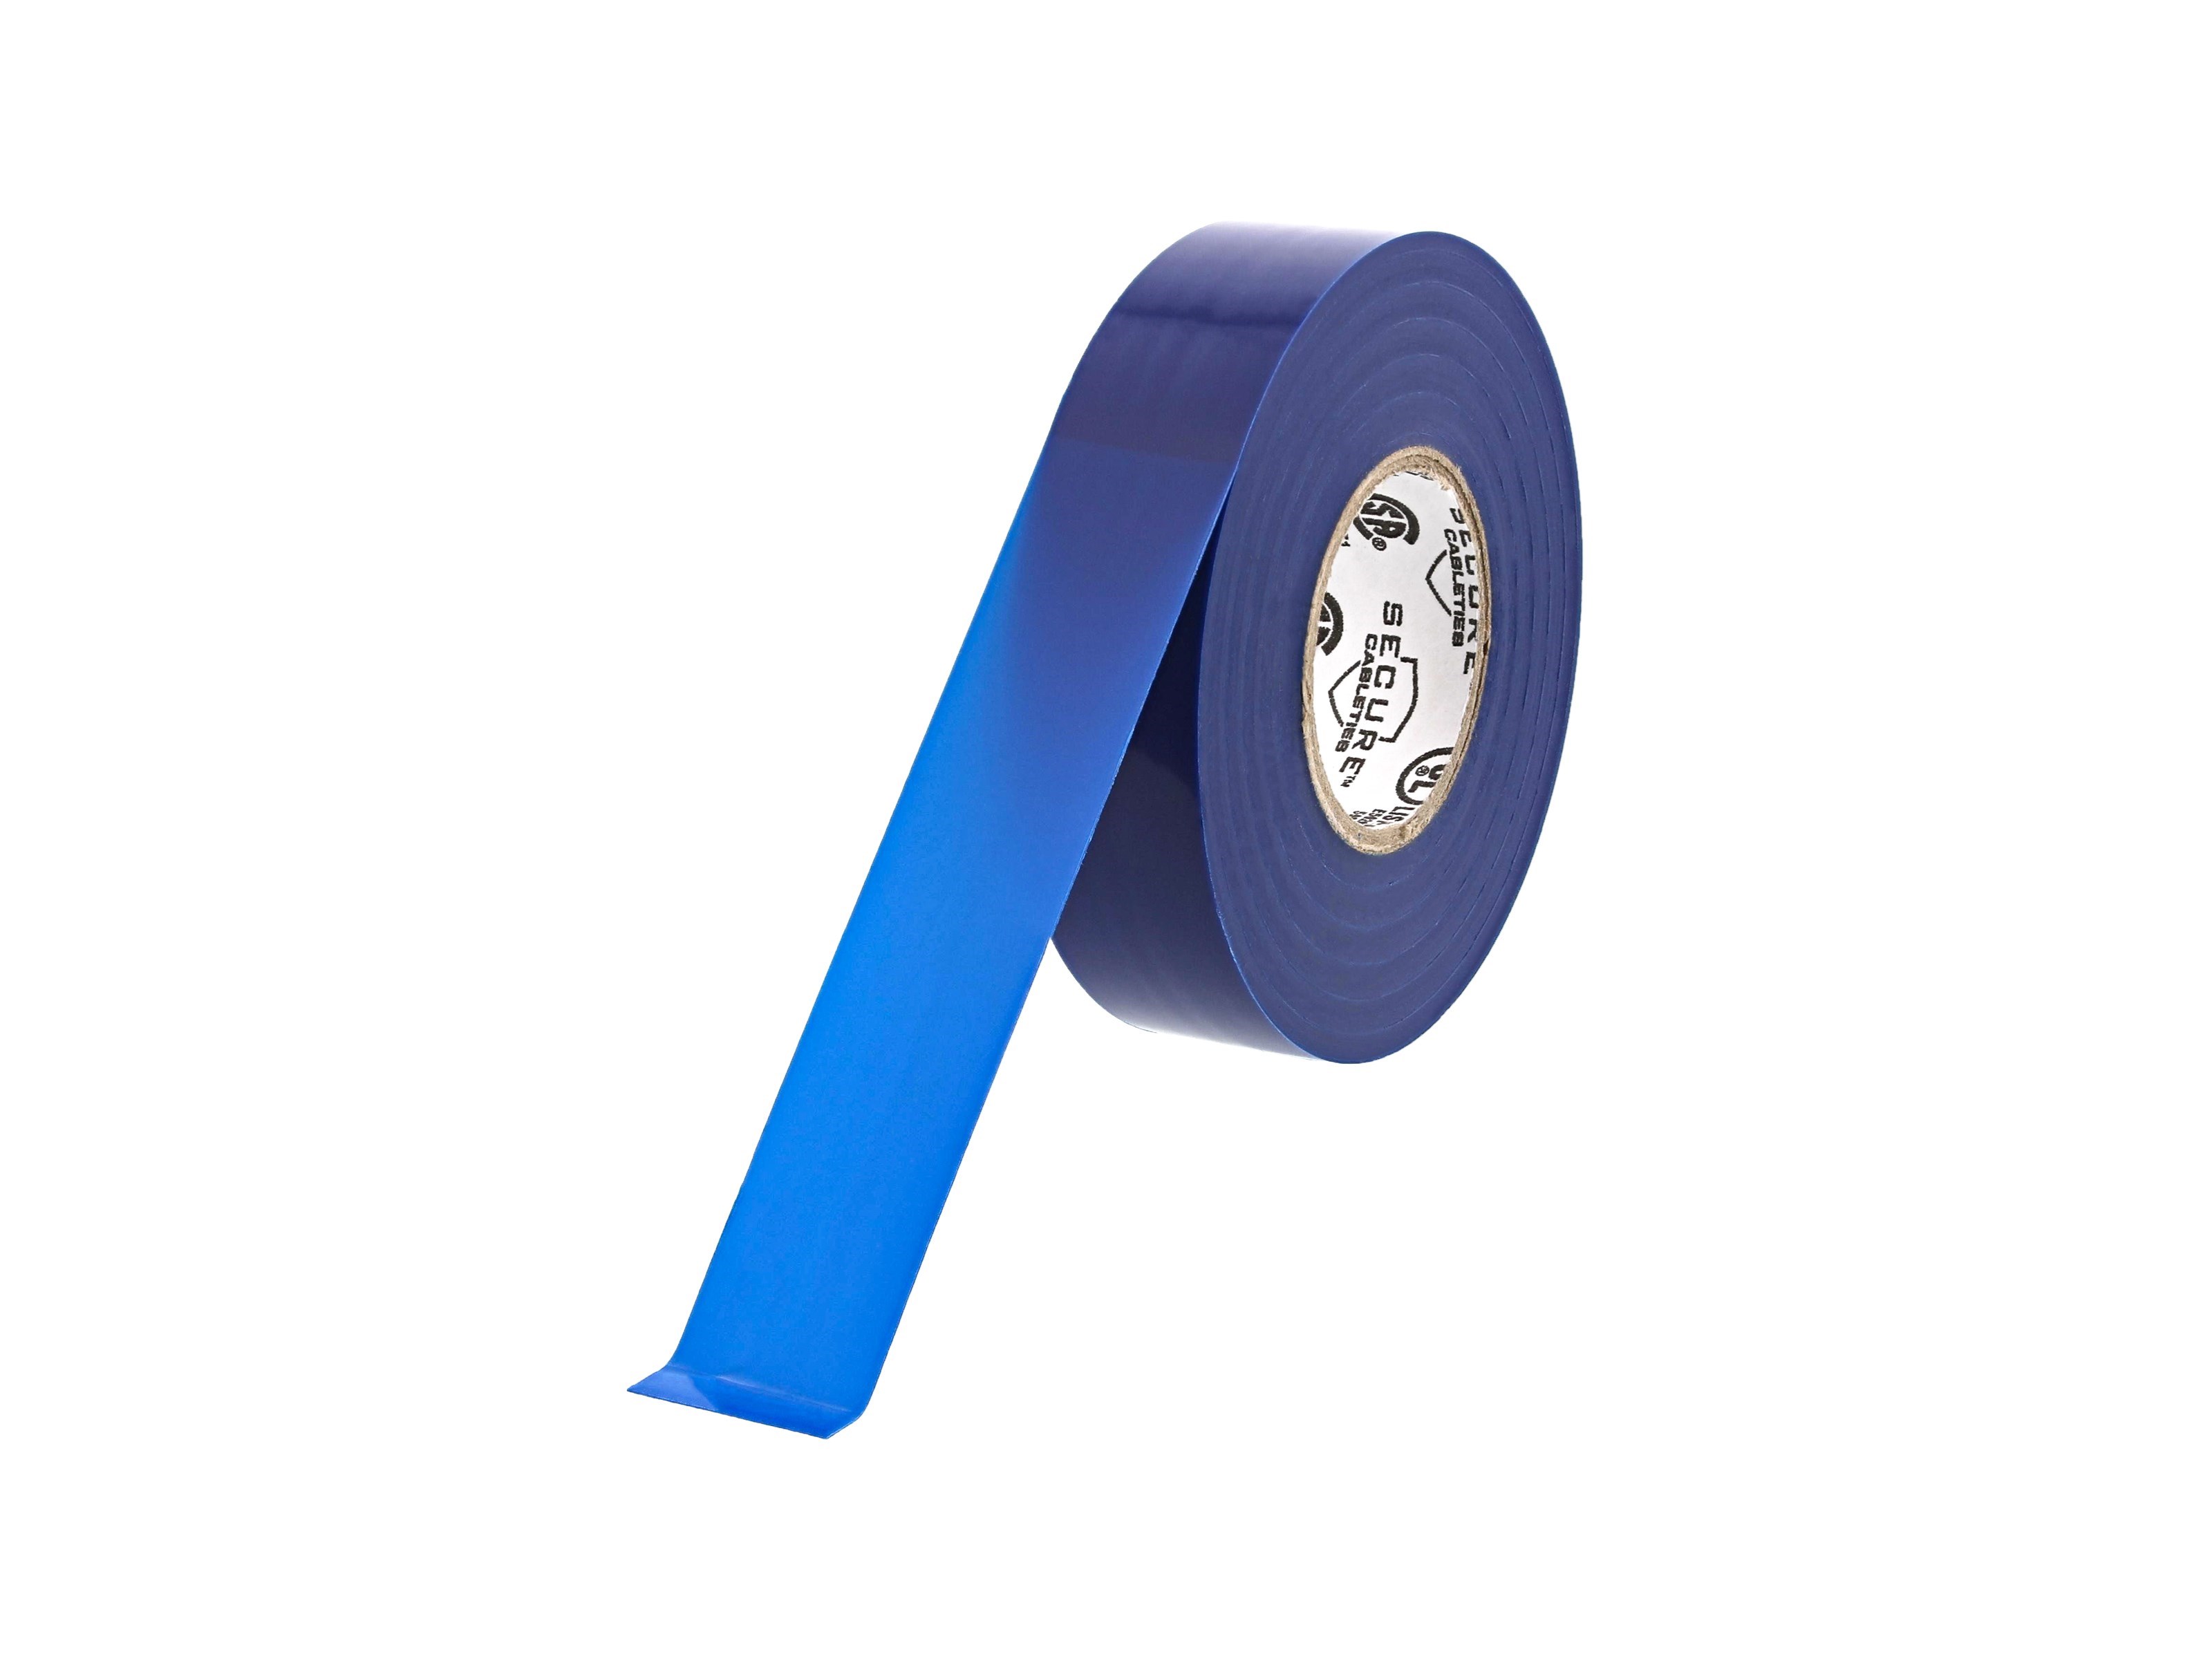 JVCC E-Tape Colored Electrical Tape: 3/4 in. x 66 ft. (Purple)